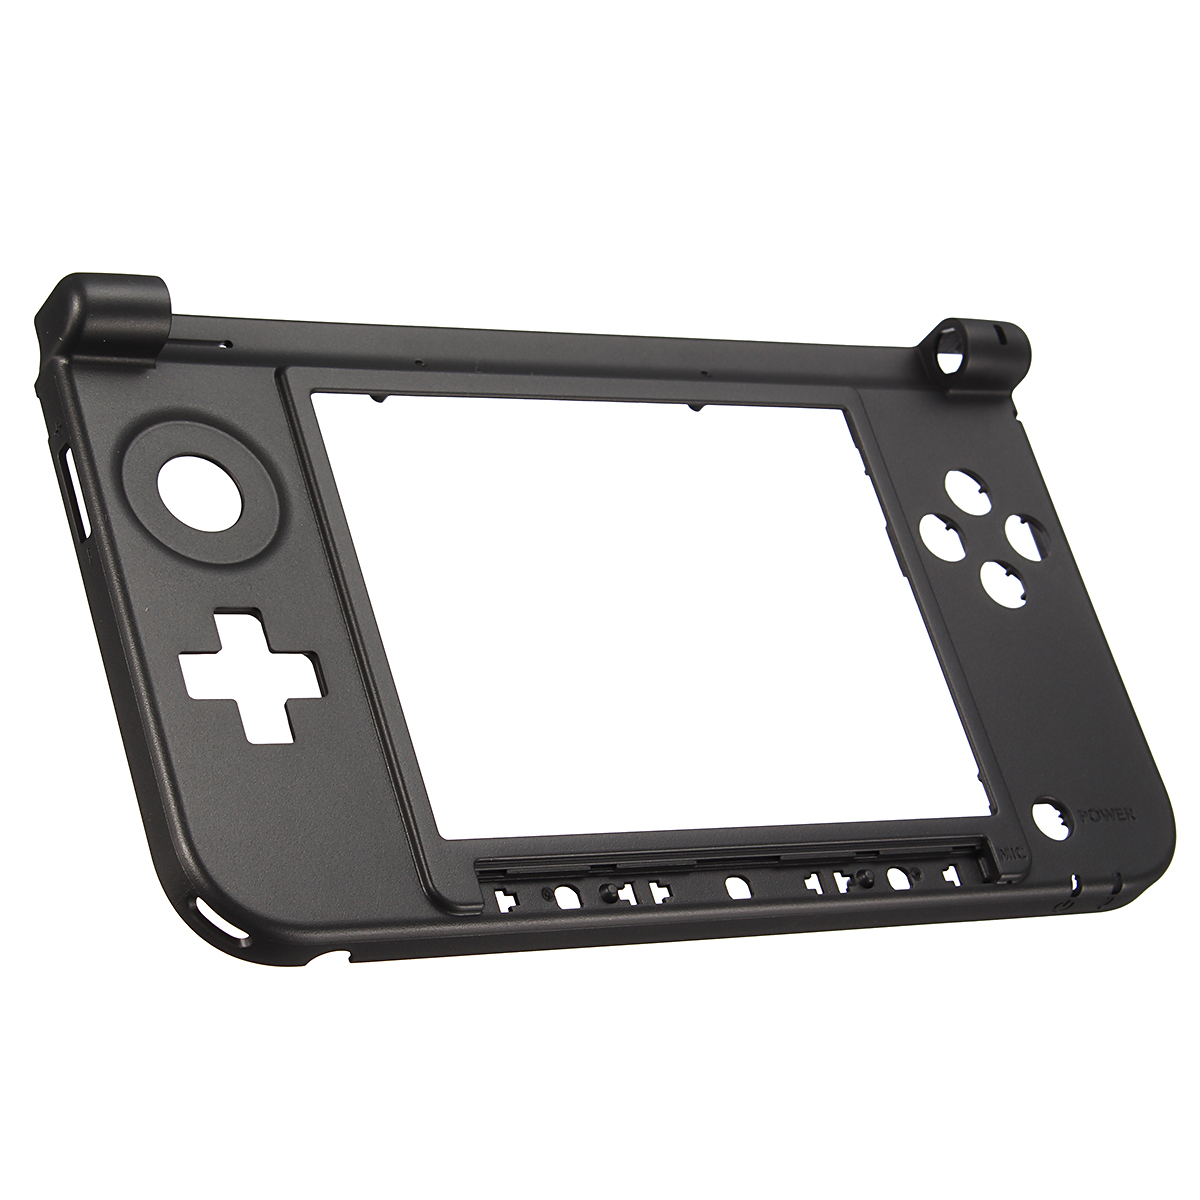 Replacement Bottom Middle Frame Housing Shell Cover Case for Nintendo 3DS XL 3DS LL Game Console 10